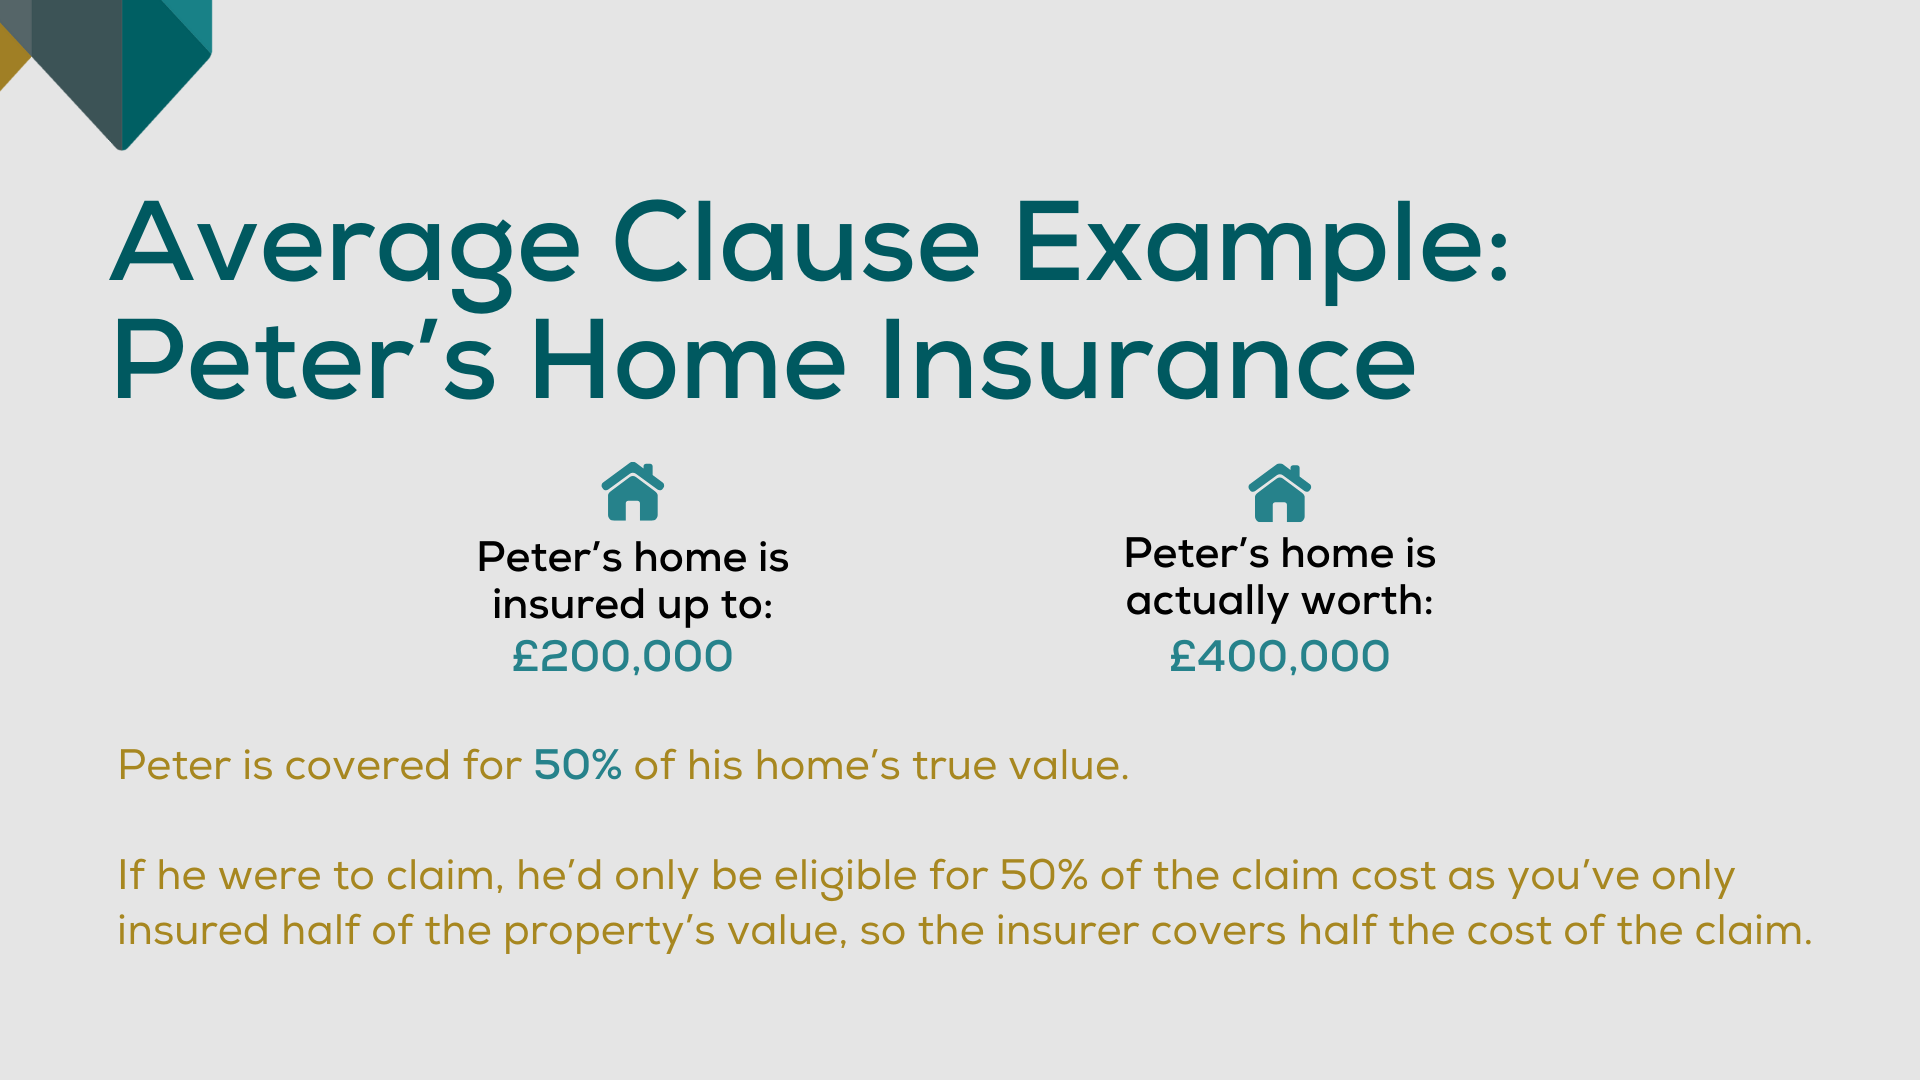 An infographic showing how underinsurance works with Home Insurance.